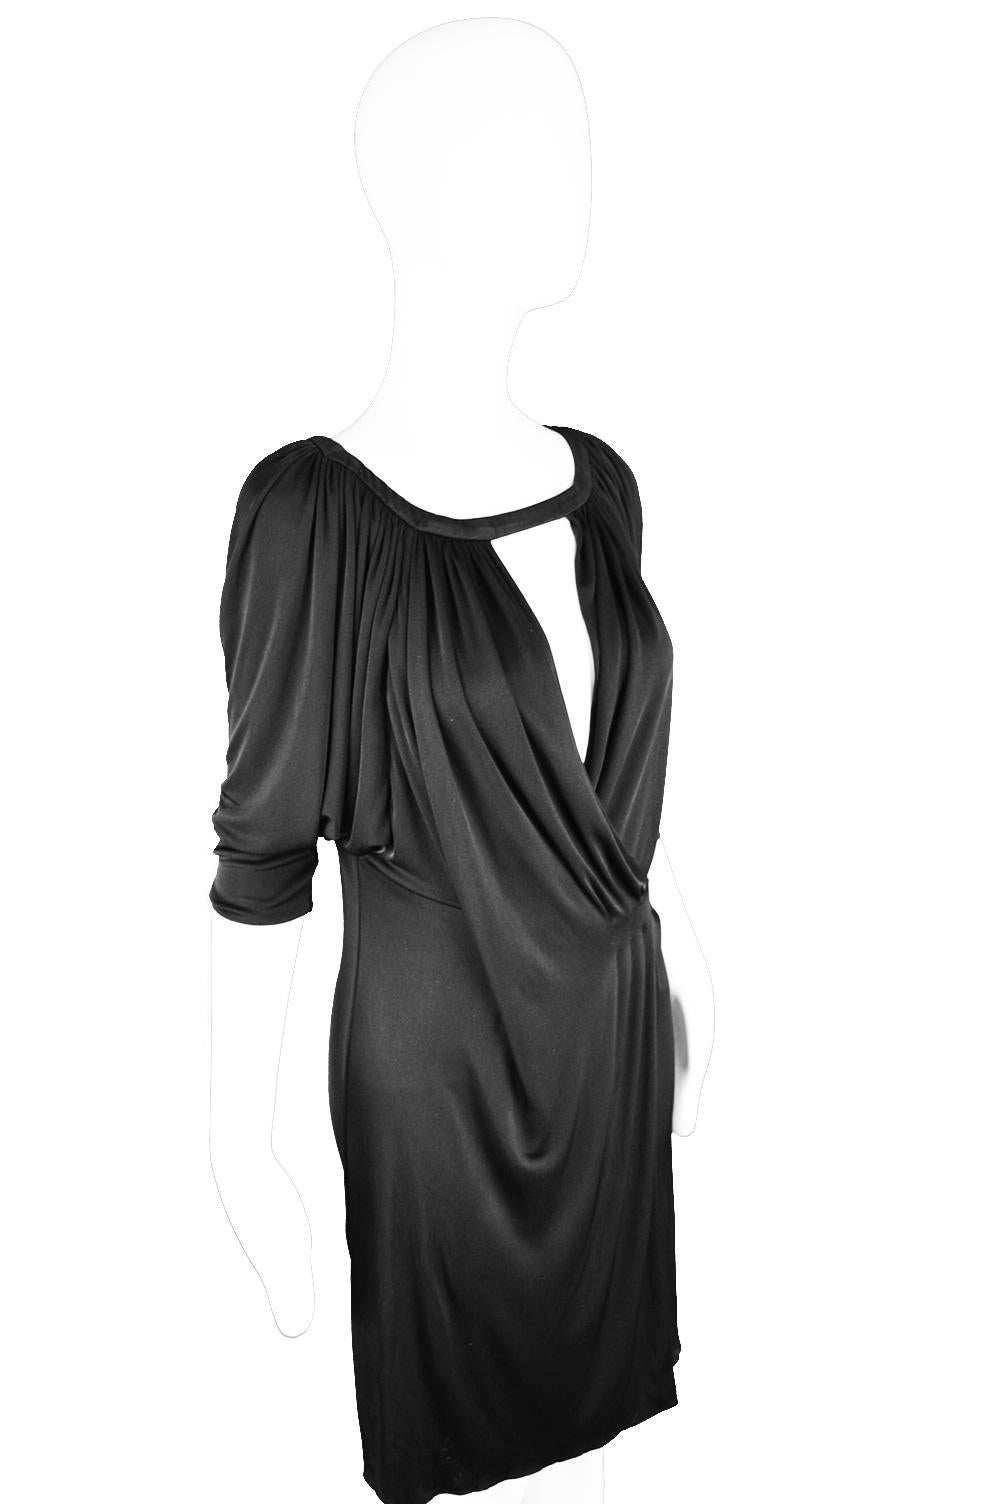 Gianni Versace Couture Black Jersey Batwing Vintage Dress, Spring 2001 In Good Condition For Sale In Doncaster, South Yorkshire